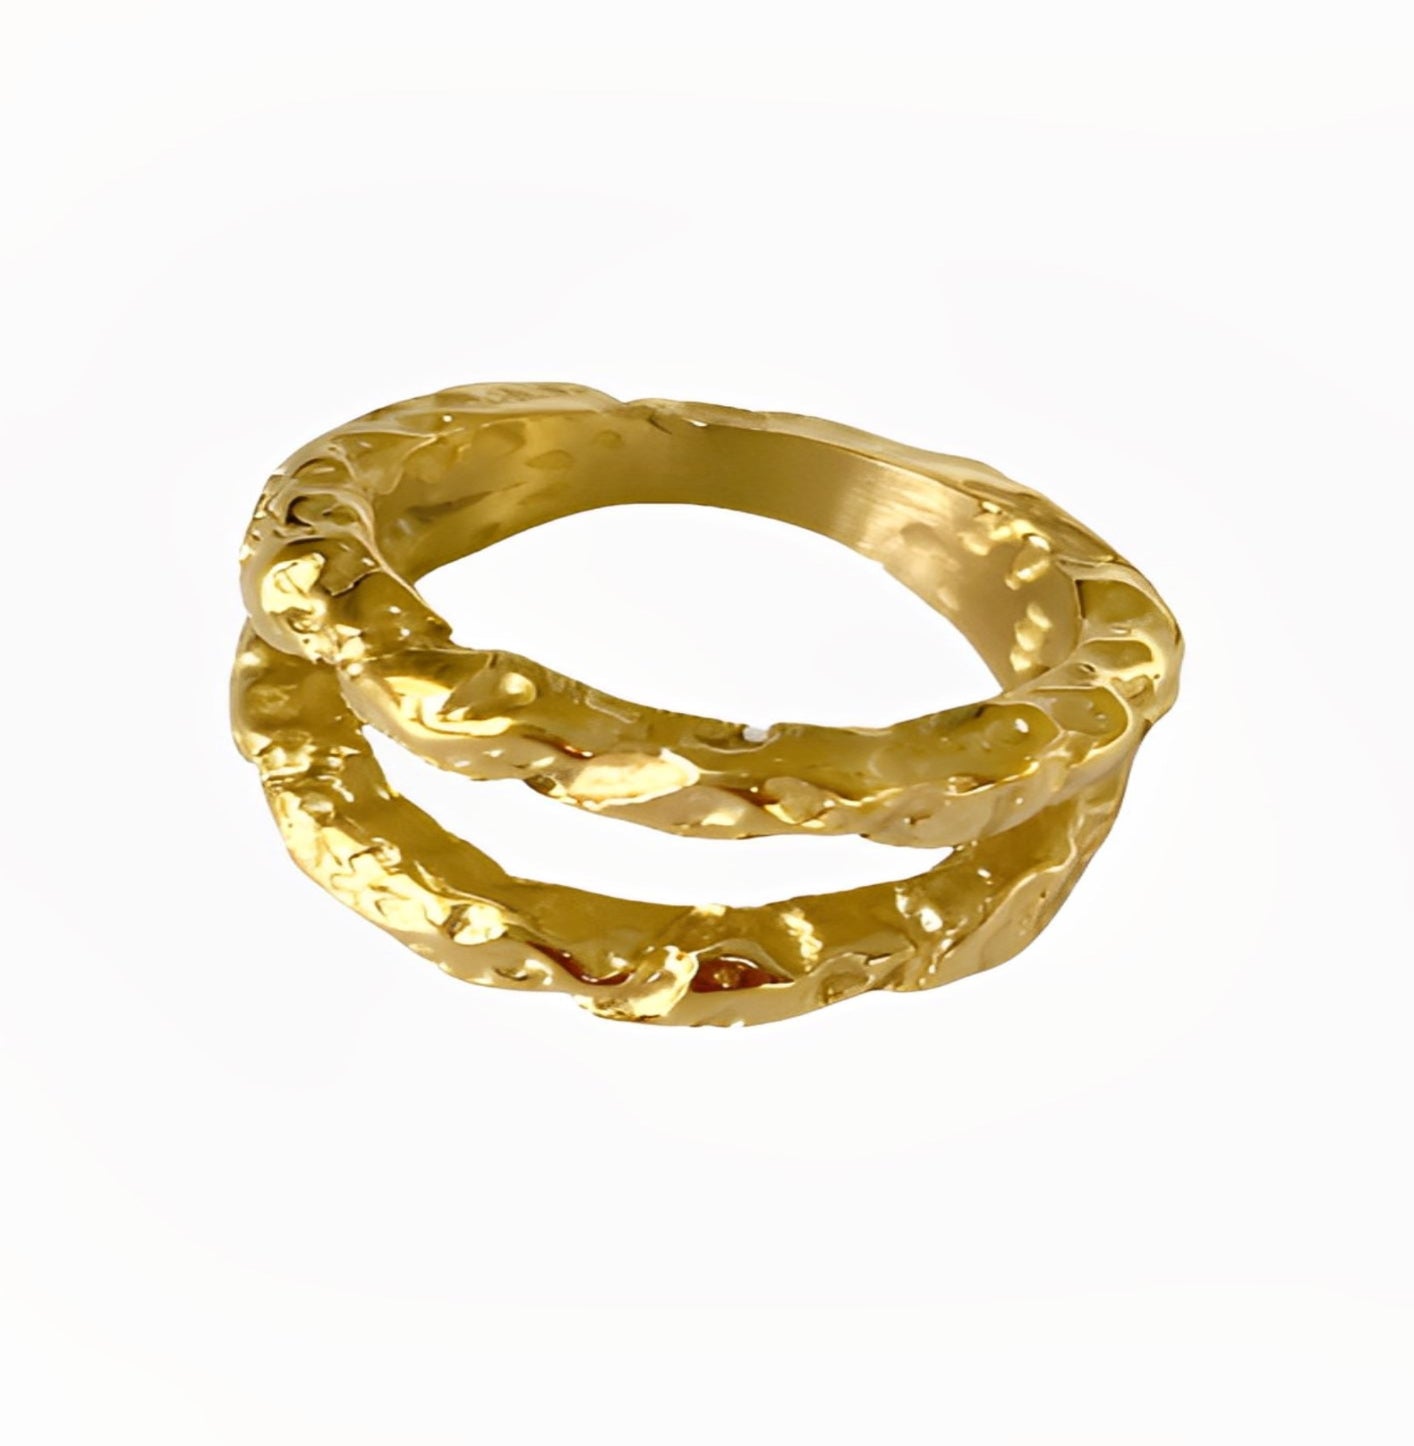 CHUNKY RING ring Yubama Jewelry Online Store - The Elegant Designs of Gold and Silver ! 6 